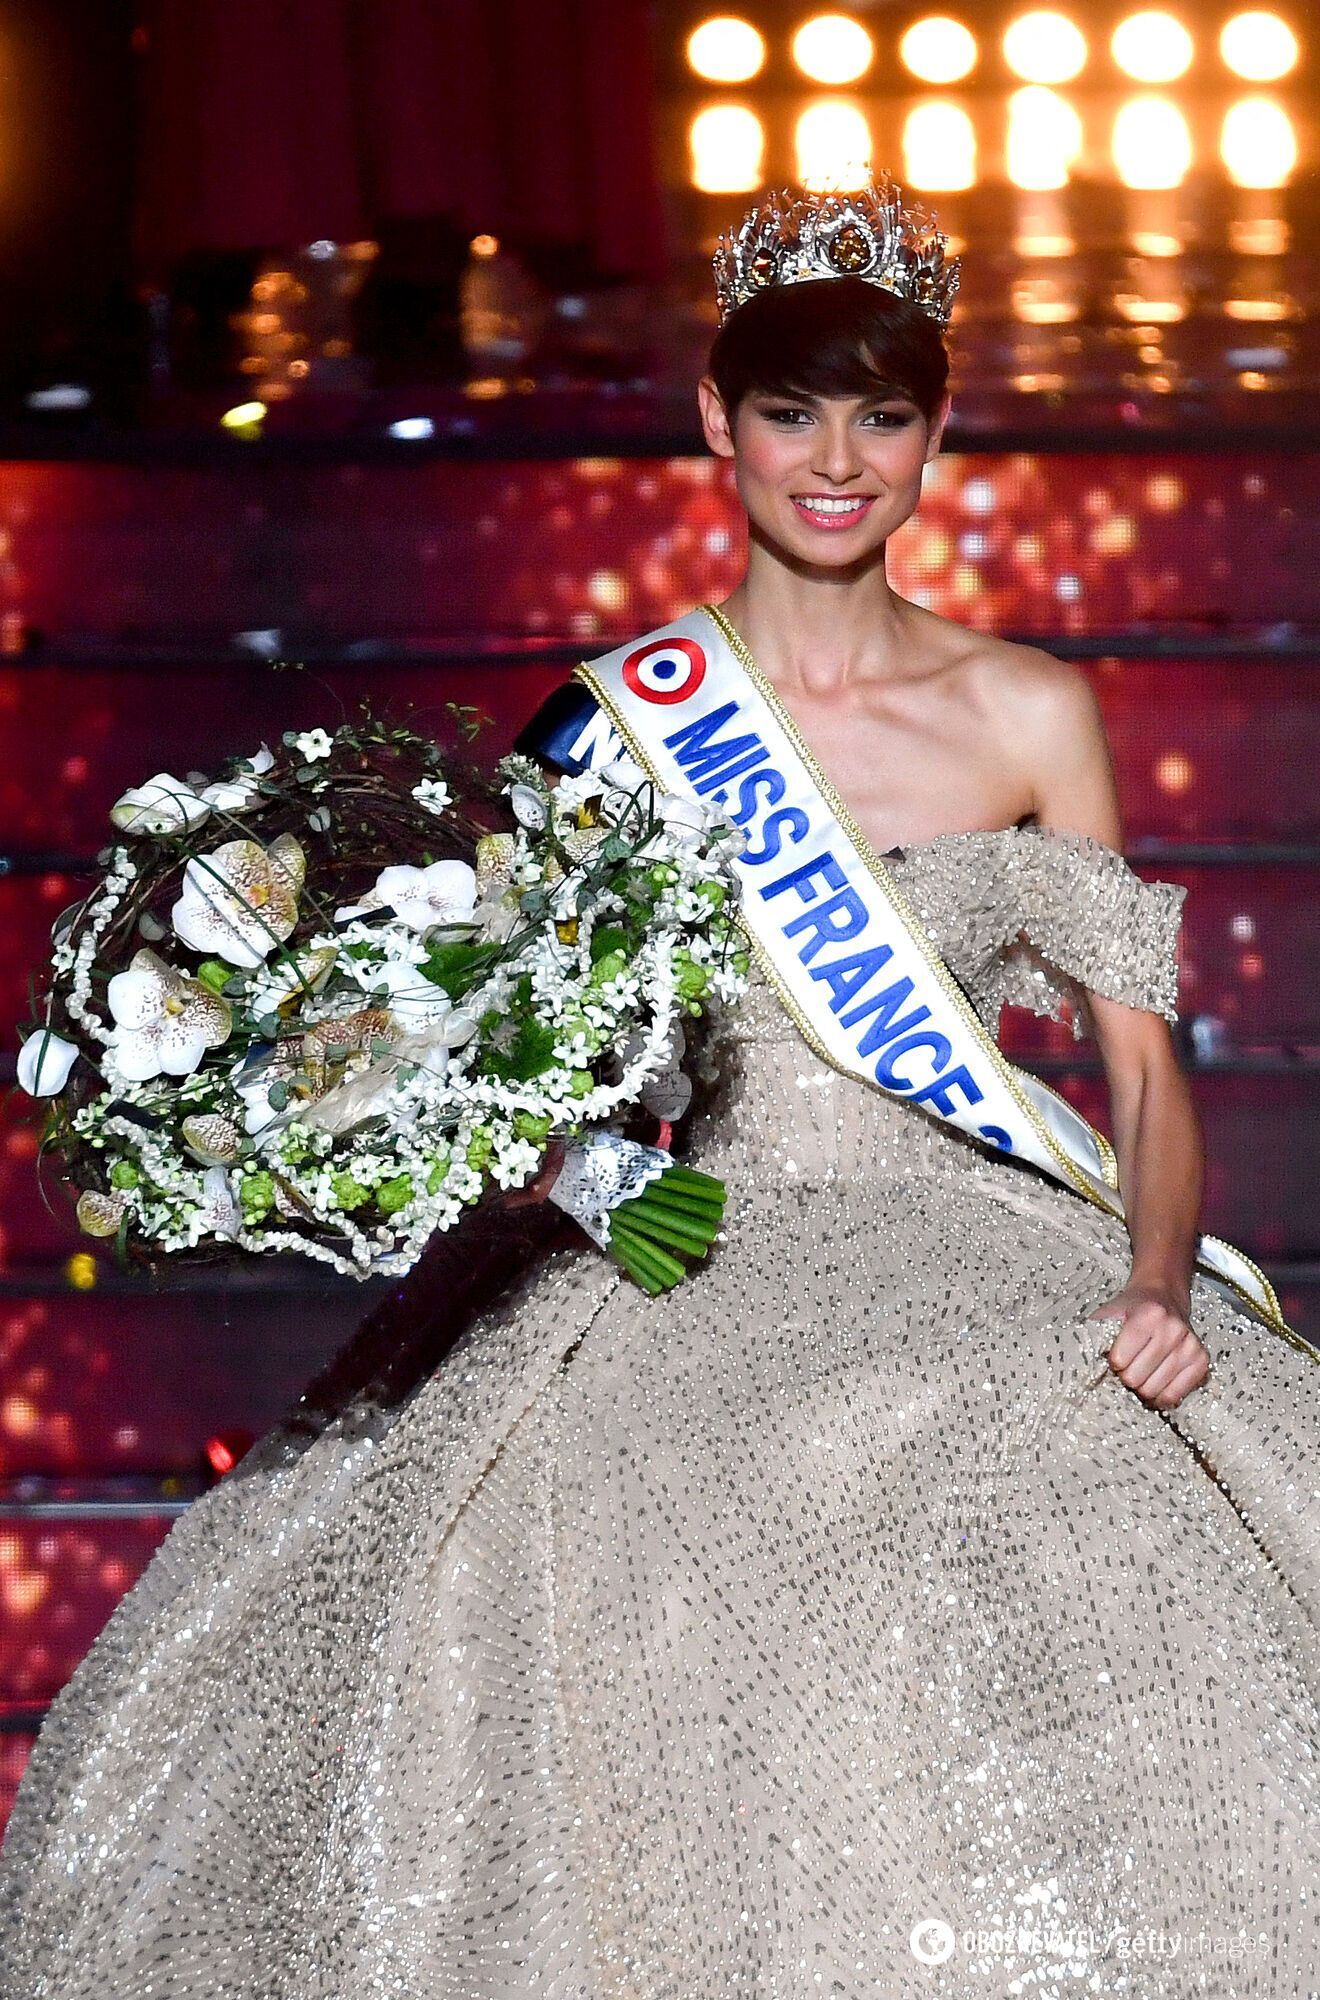 The new Miss France Eve Gilles